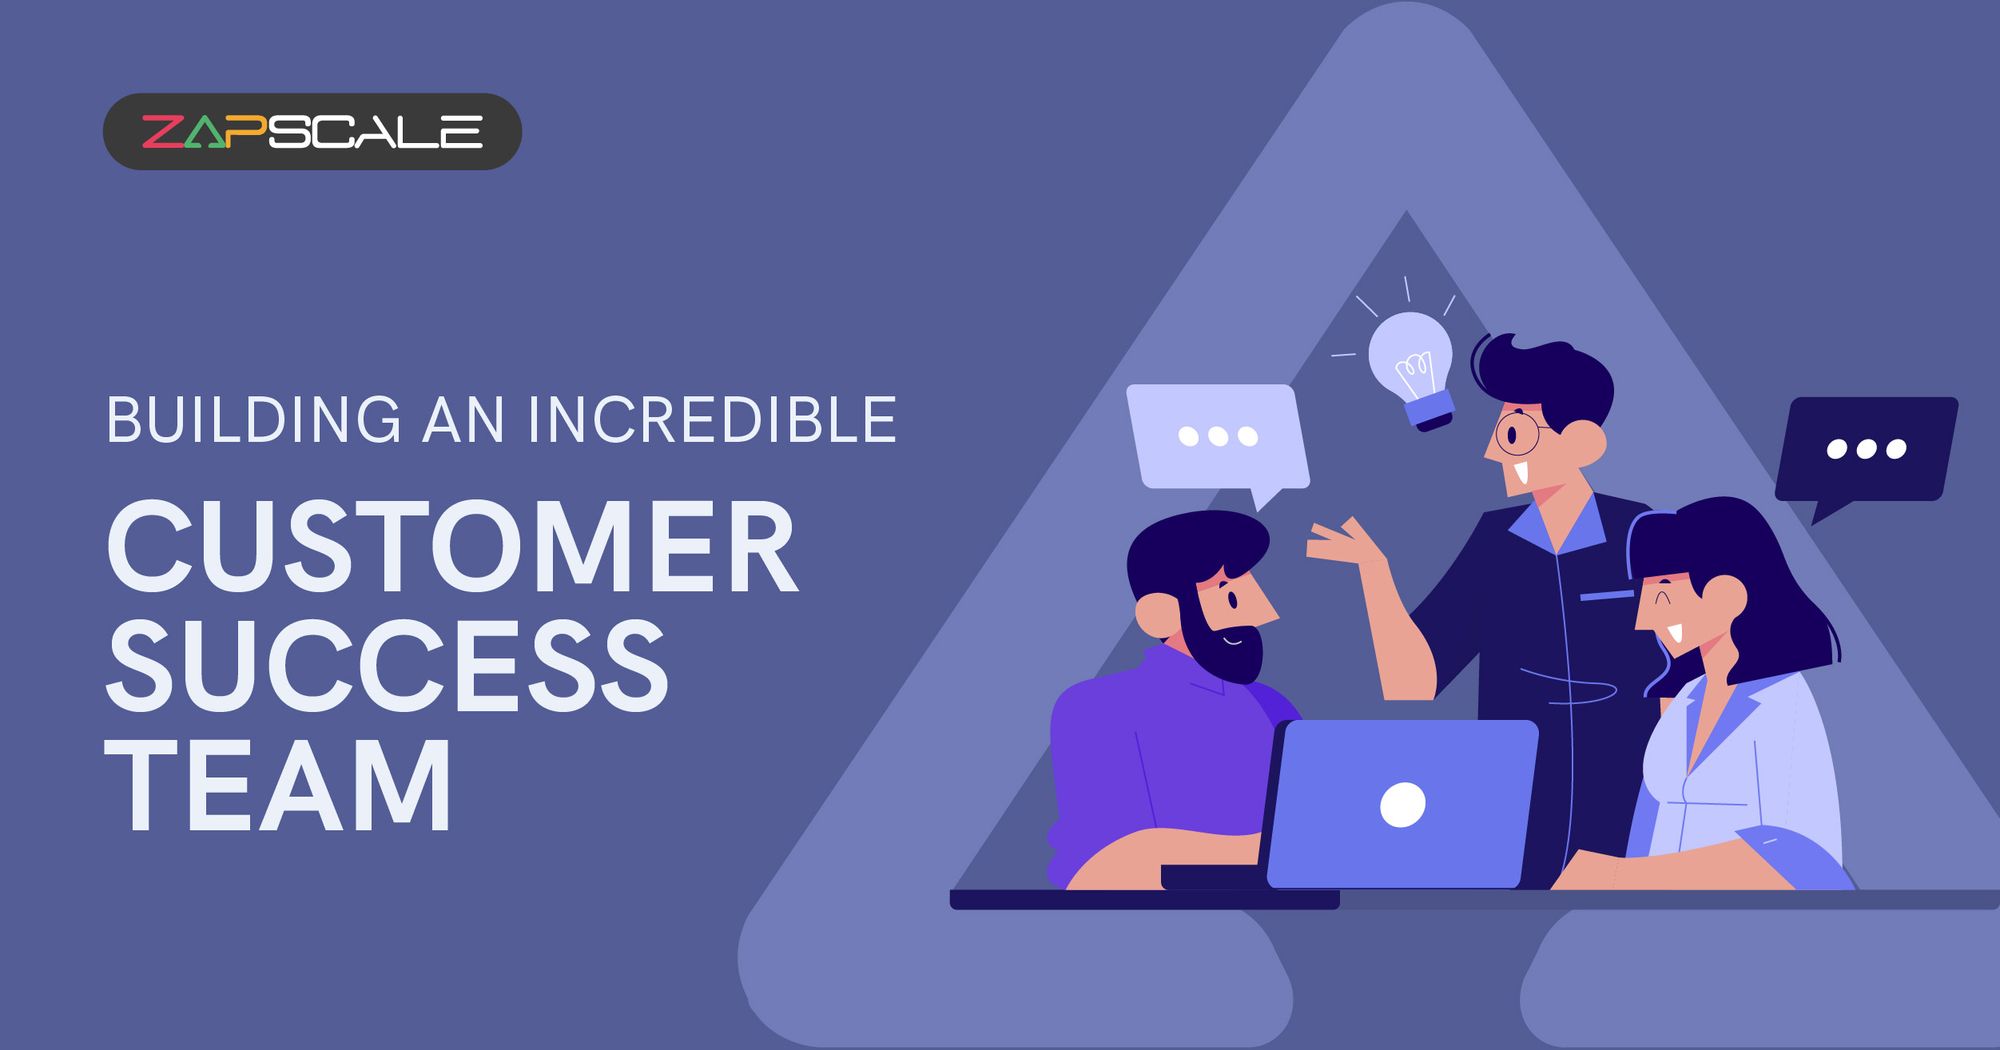 How To Build a High-Performing Customer Success Team